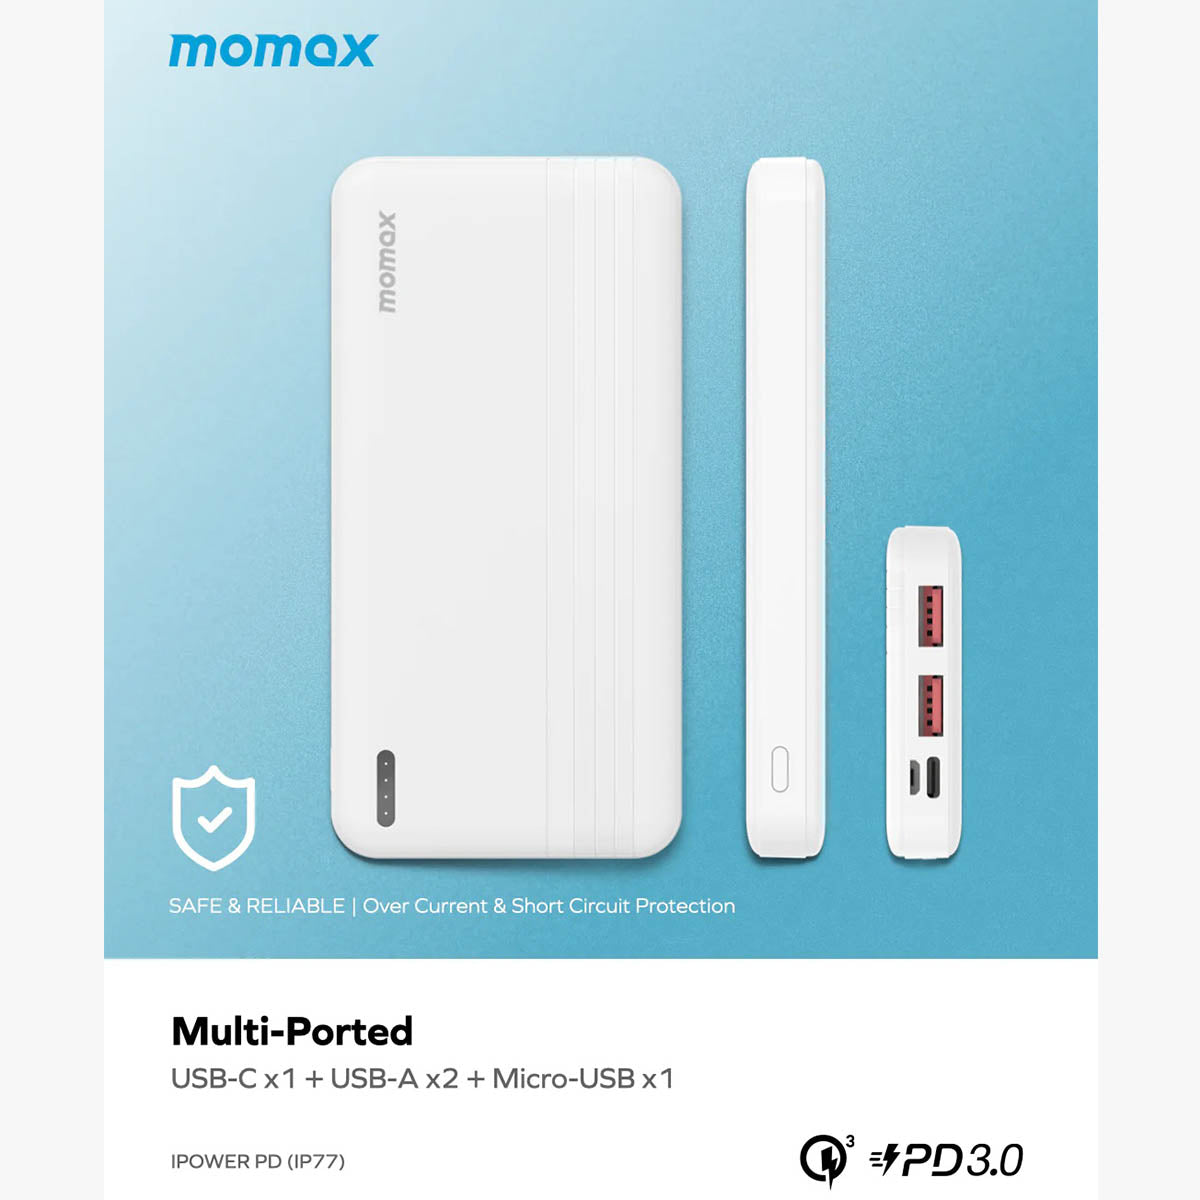 Momax iPower PD Fast Charge Power Bank (10000 mAh)